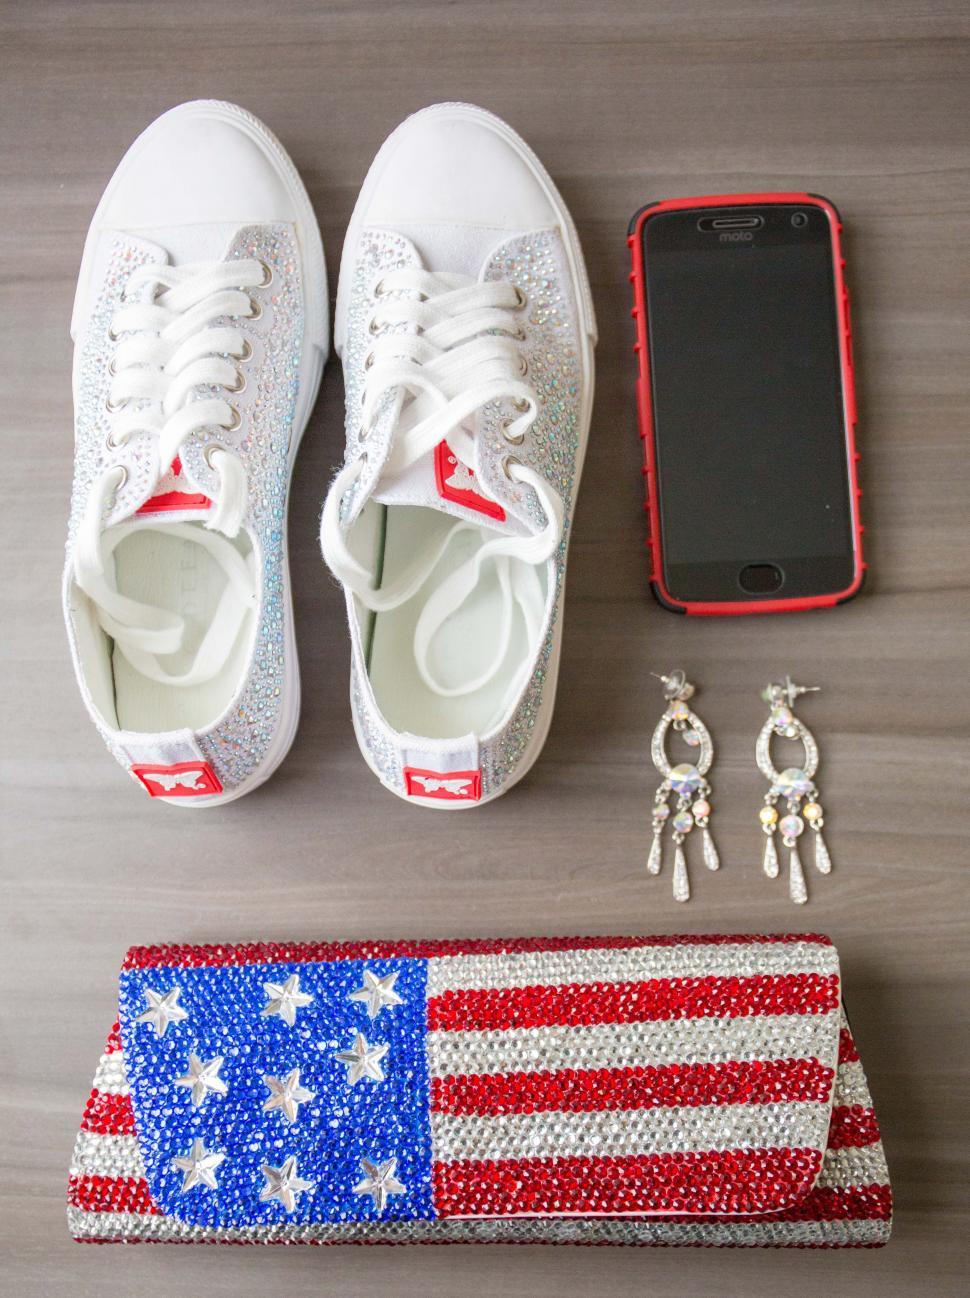 Free Image of A pair of shoes and a phone next to a purse and earrings 